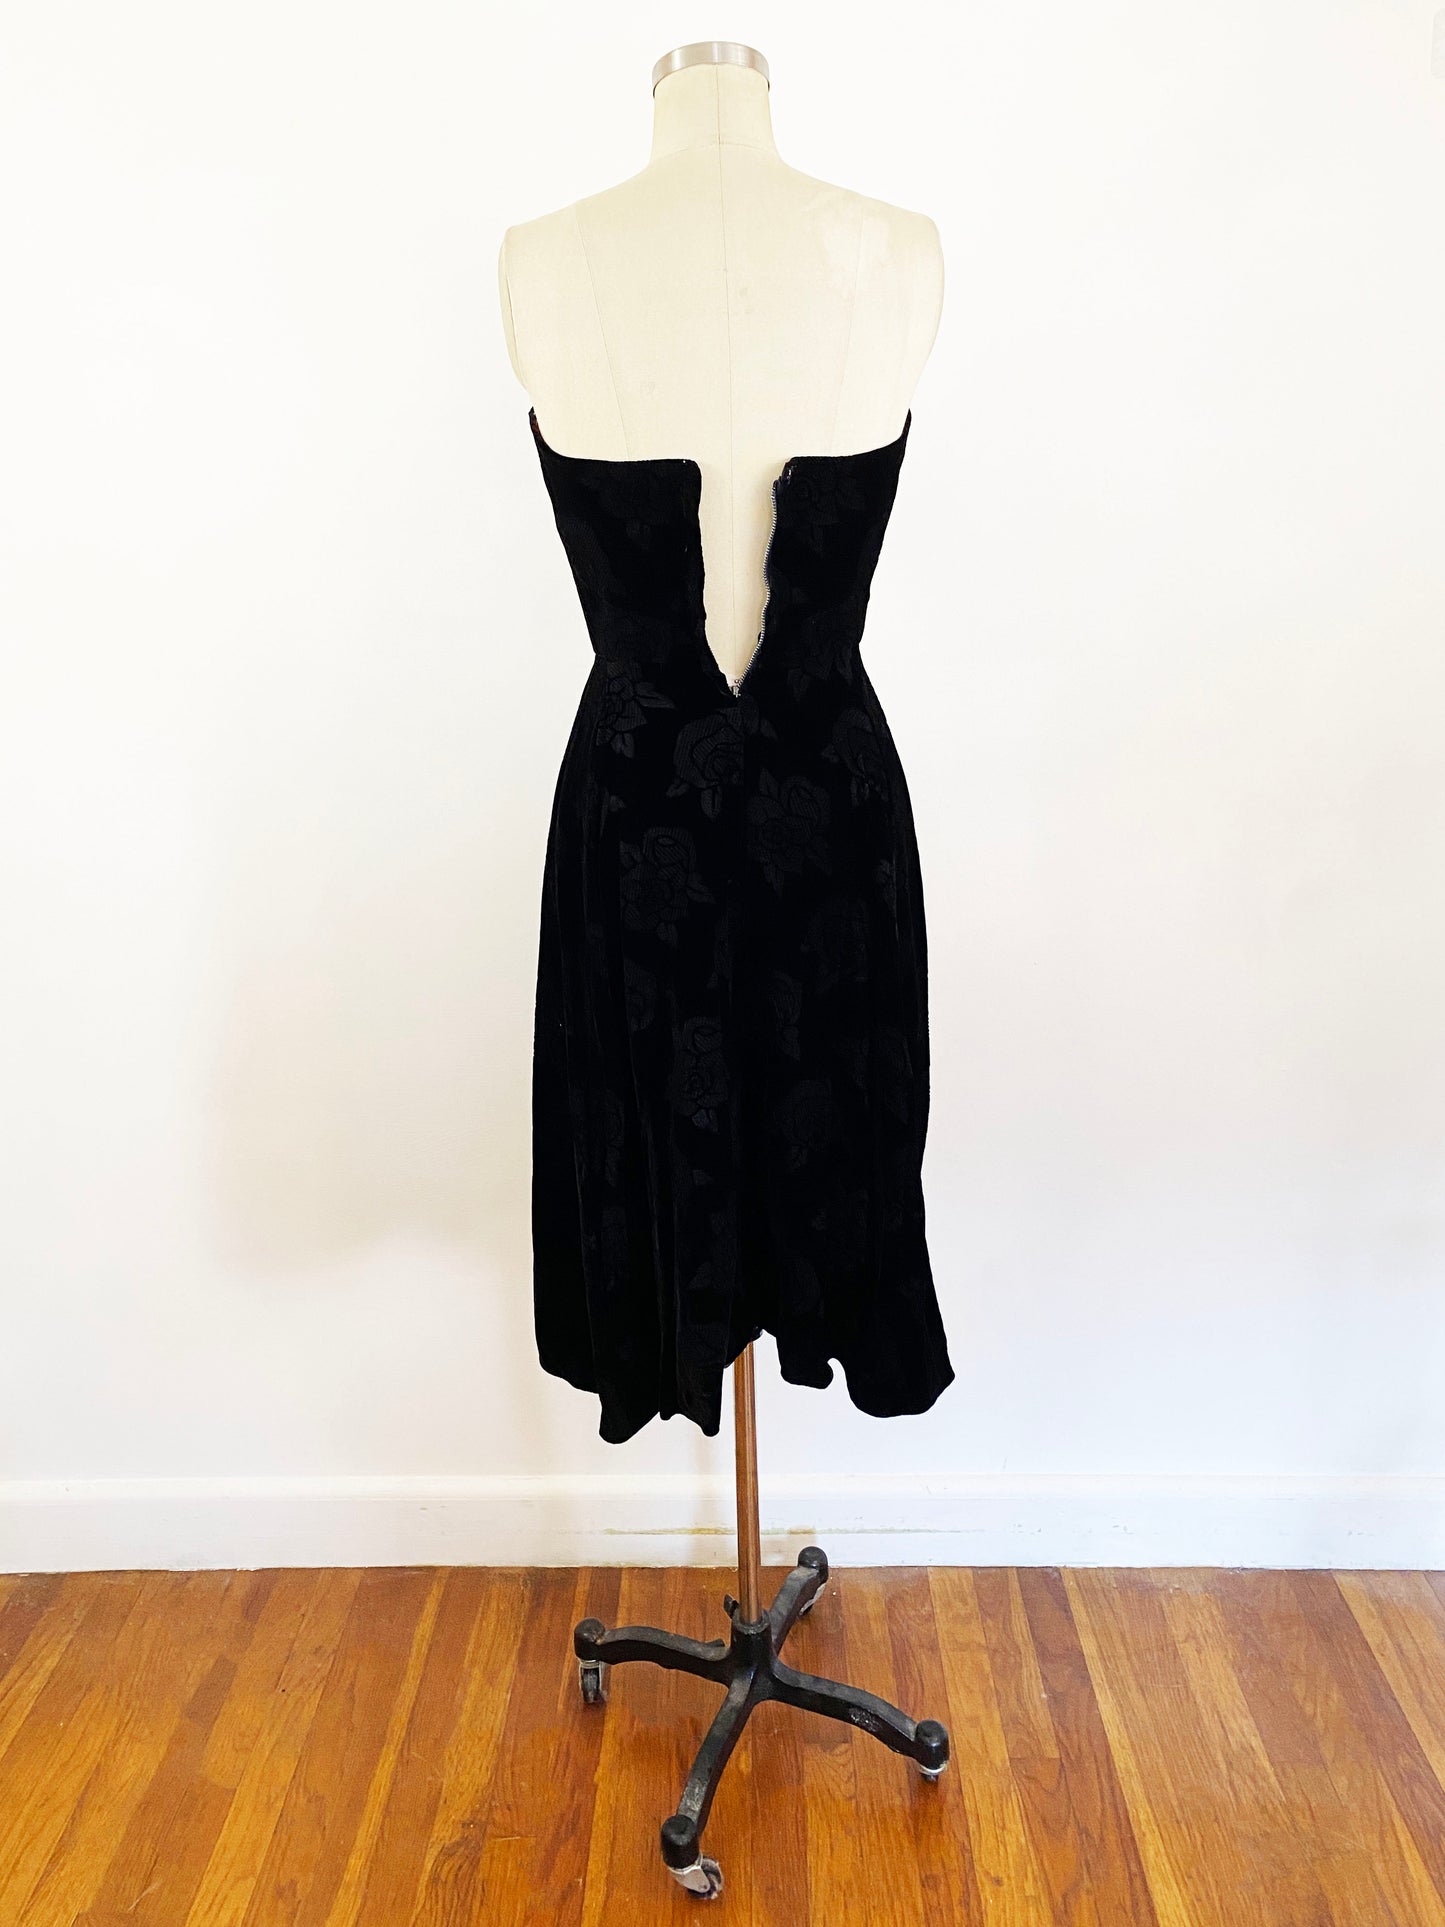 1960s Mary Carter by Will Steinman Burnout Velvet Rose Black Dress Strapless Party Dress Retro Cocktail Dress / Extra Small